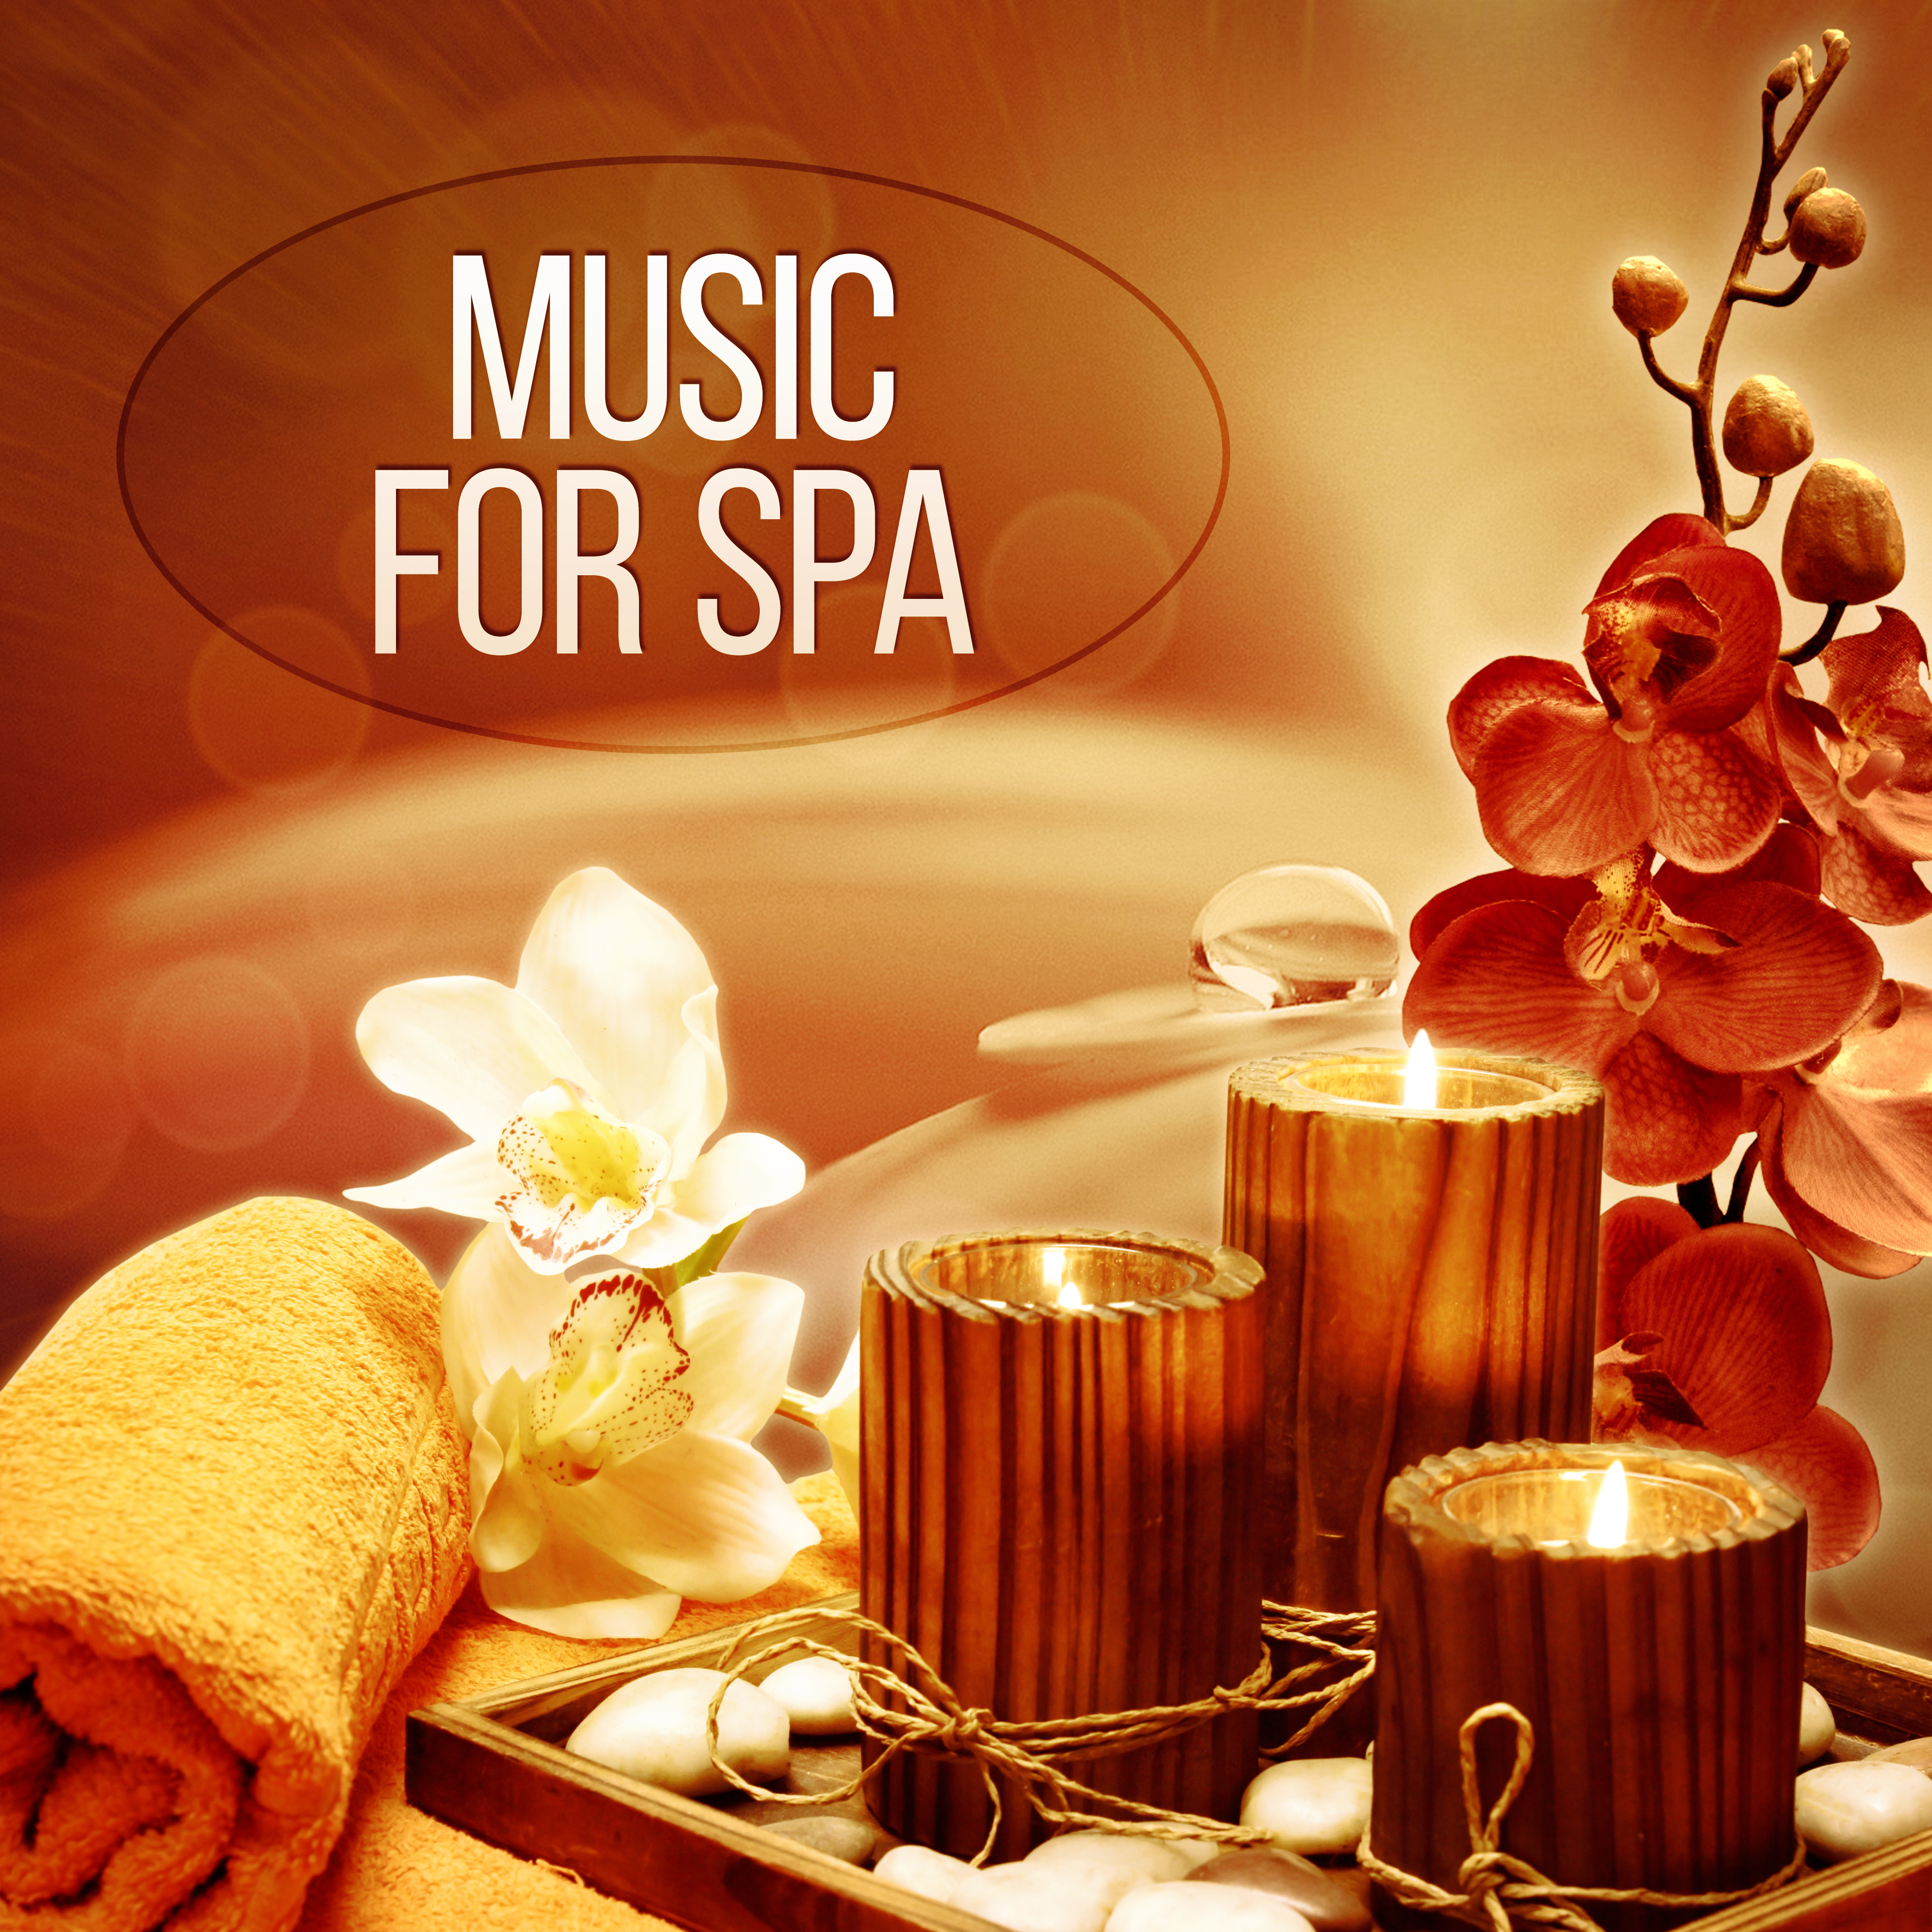 Music for Spa – Nature Sounds, Harmony, Sensual Massage, Relaxing Background Spa Music, Stress Relief, Calming Music, Gentle Touch